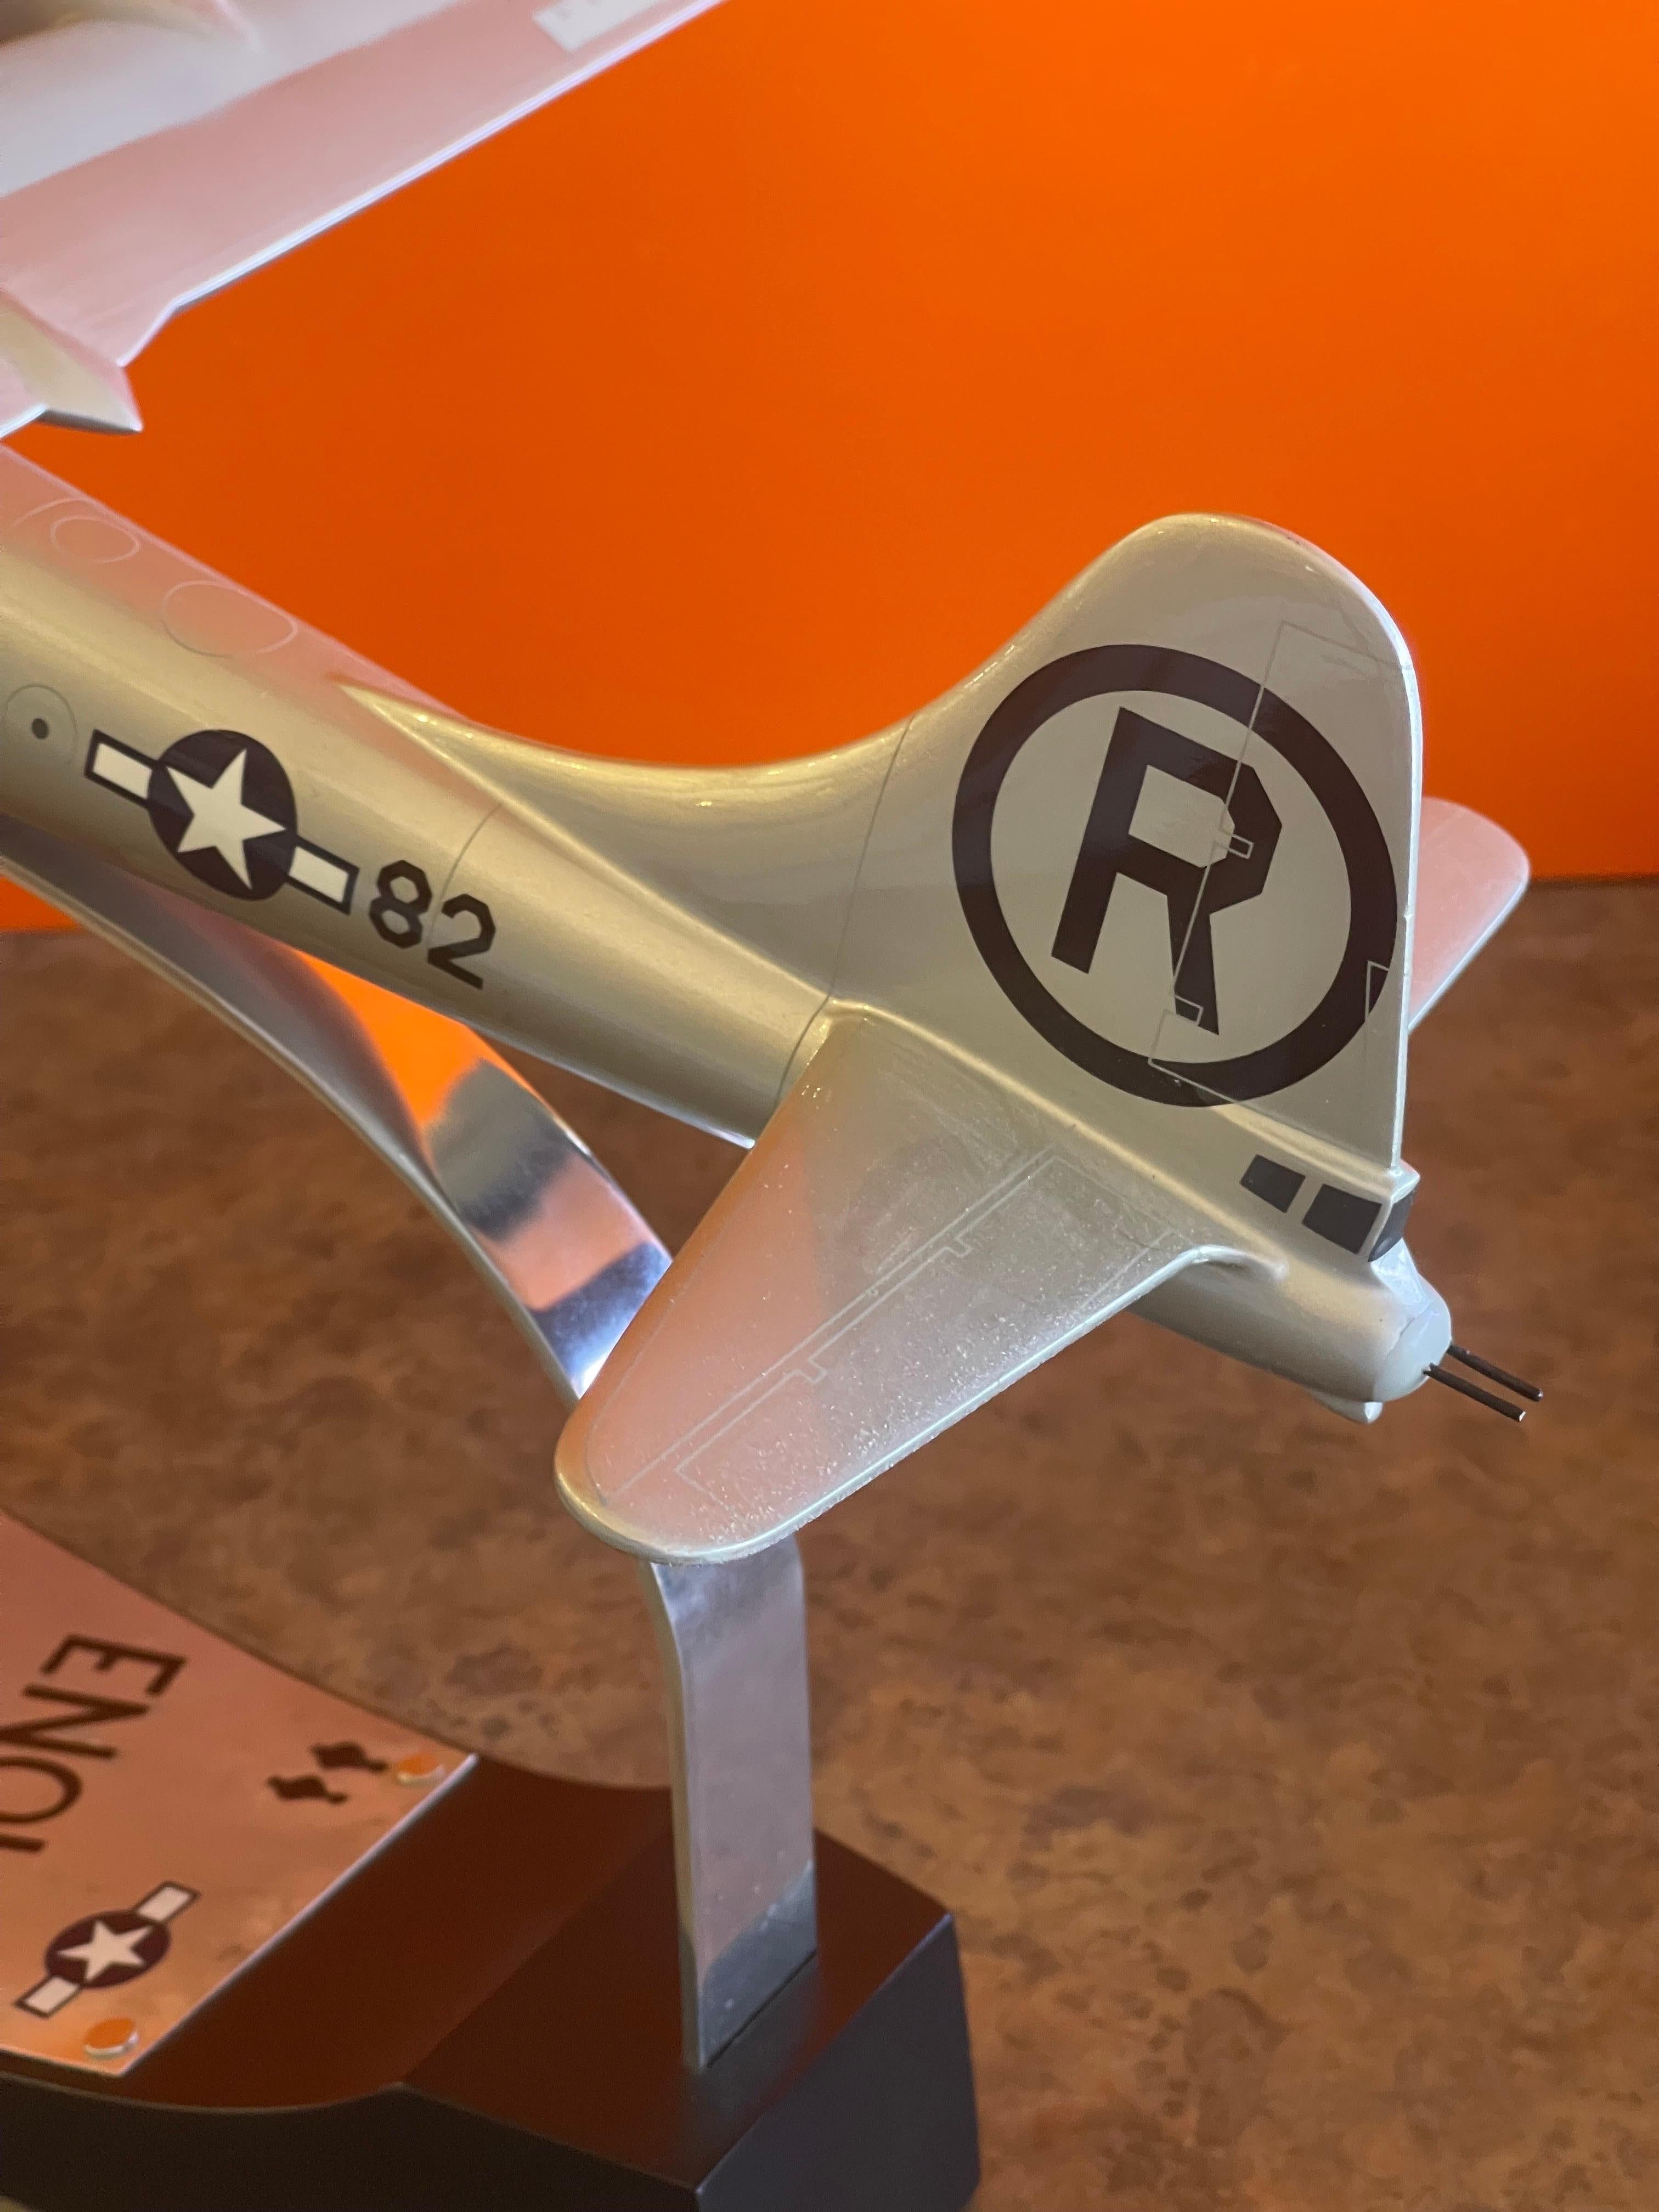 Plastic Enola Gay B-29 Bomber Model Airplane, Signed by Pilot Paul Tibbetts WW II For Sale